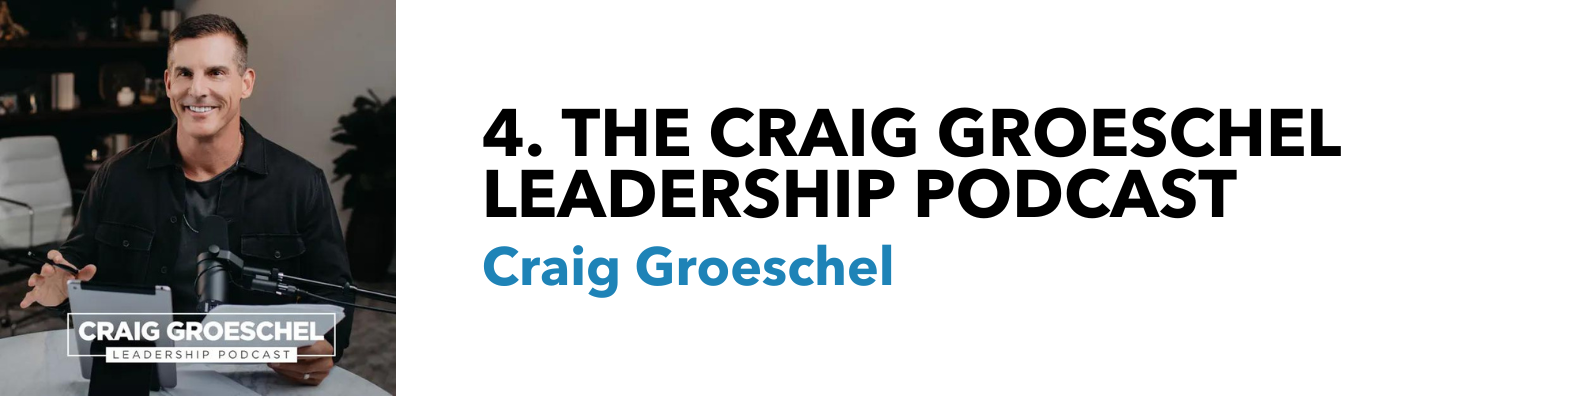 <a href="https://podcasts.apple.com/us/podcast/craig-groeschel-leadership-podcast/id1070649025">Listen on Apple Podcasts</a>